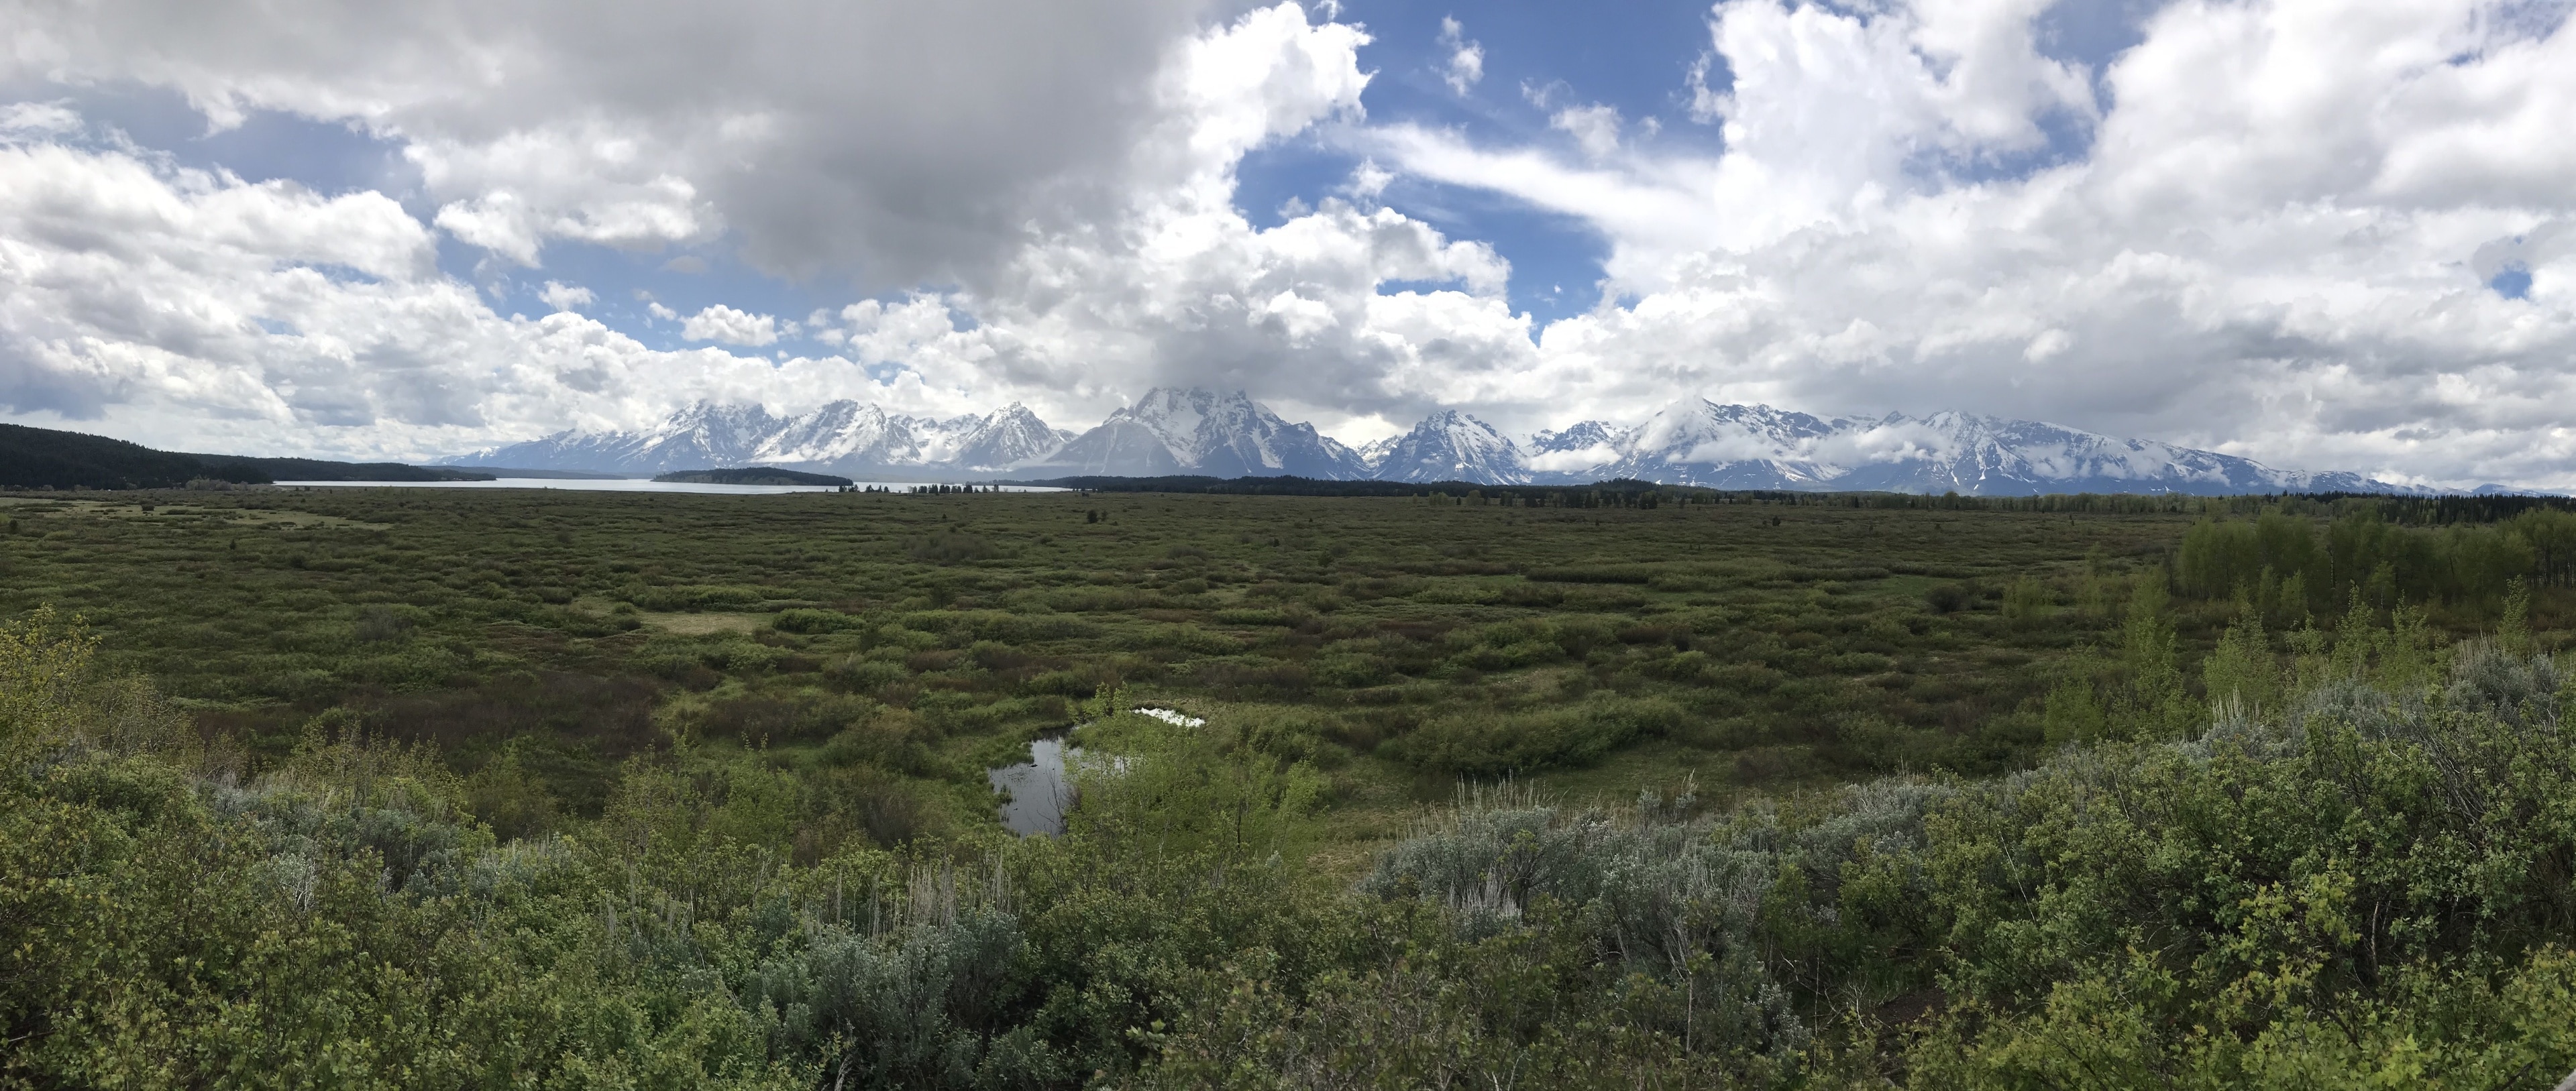 We really enjoyed the drive from the Grand Tetons to Yellowstone.  This is the view from Jackson Lake Lodge where we stopped for lunch and watched for wildlife. Pro tip: bring binoculars when visiting the parks! #GrandTeton #NationalPark